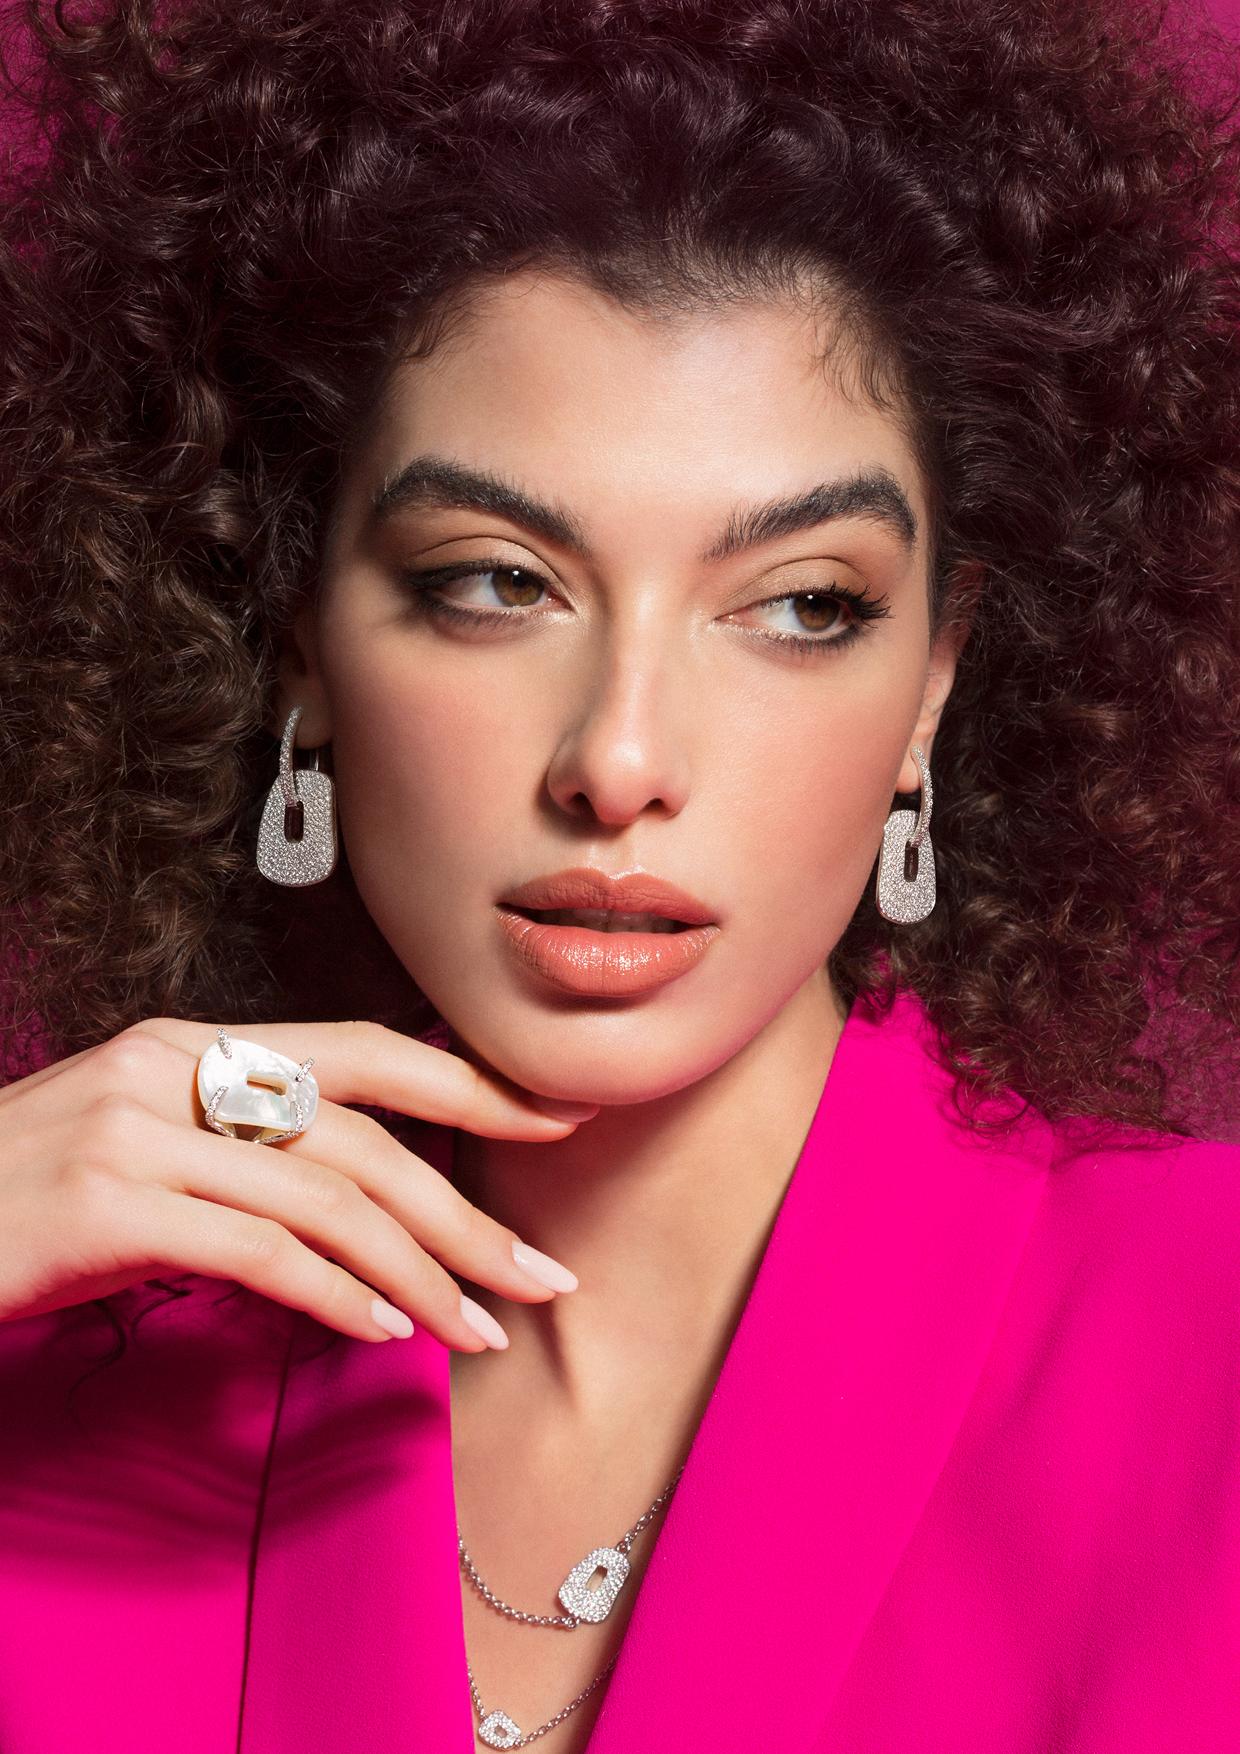 Earrings in rose gold
Measures: 35mm/1.37in

EVE_R COLLECTION
The edgy and modern colors of turquoise, onyx and coral give life to Eve_r. The new collection is inspired by the iconic and unconventional design of Mattioli Masterpieces Reve_r, whose